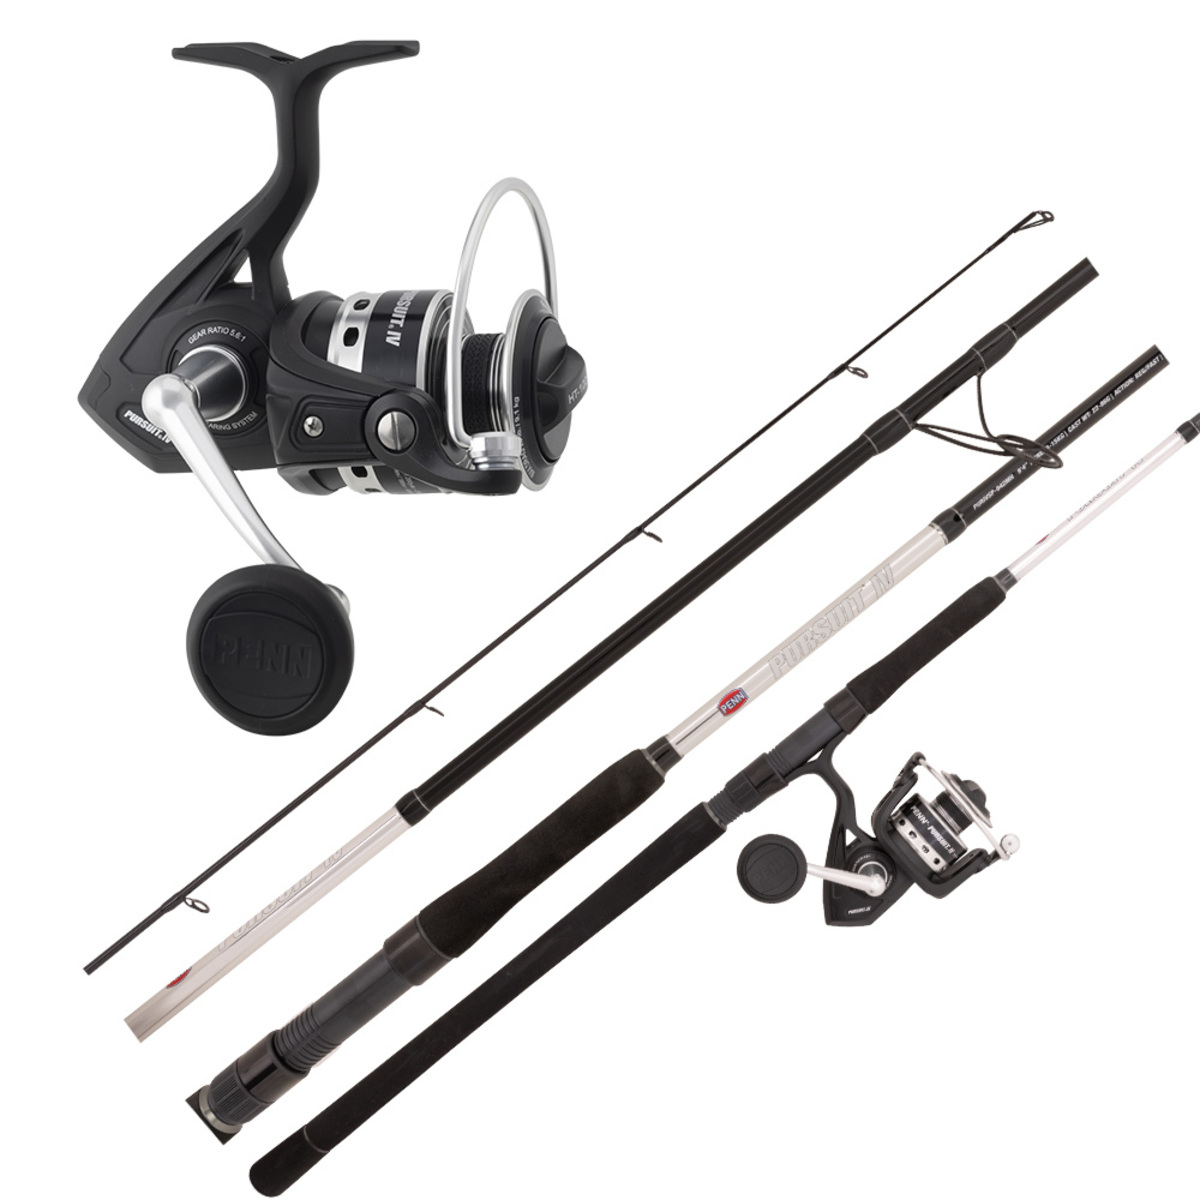  PENN 7' Pursuit IV 2-Piece Fishing Rod and Reel (Size